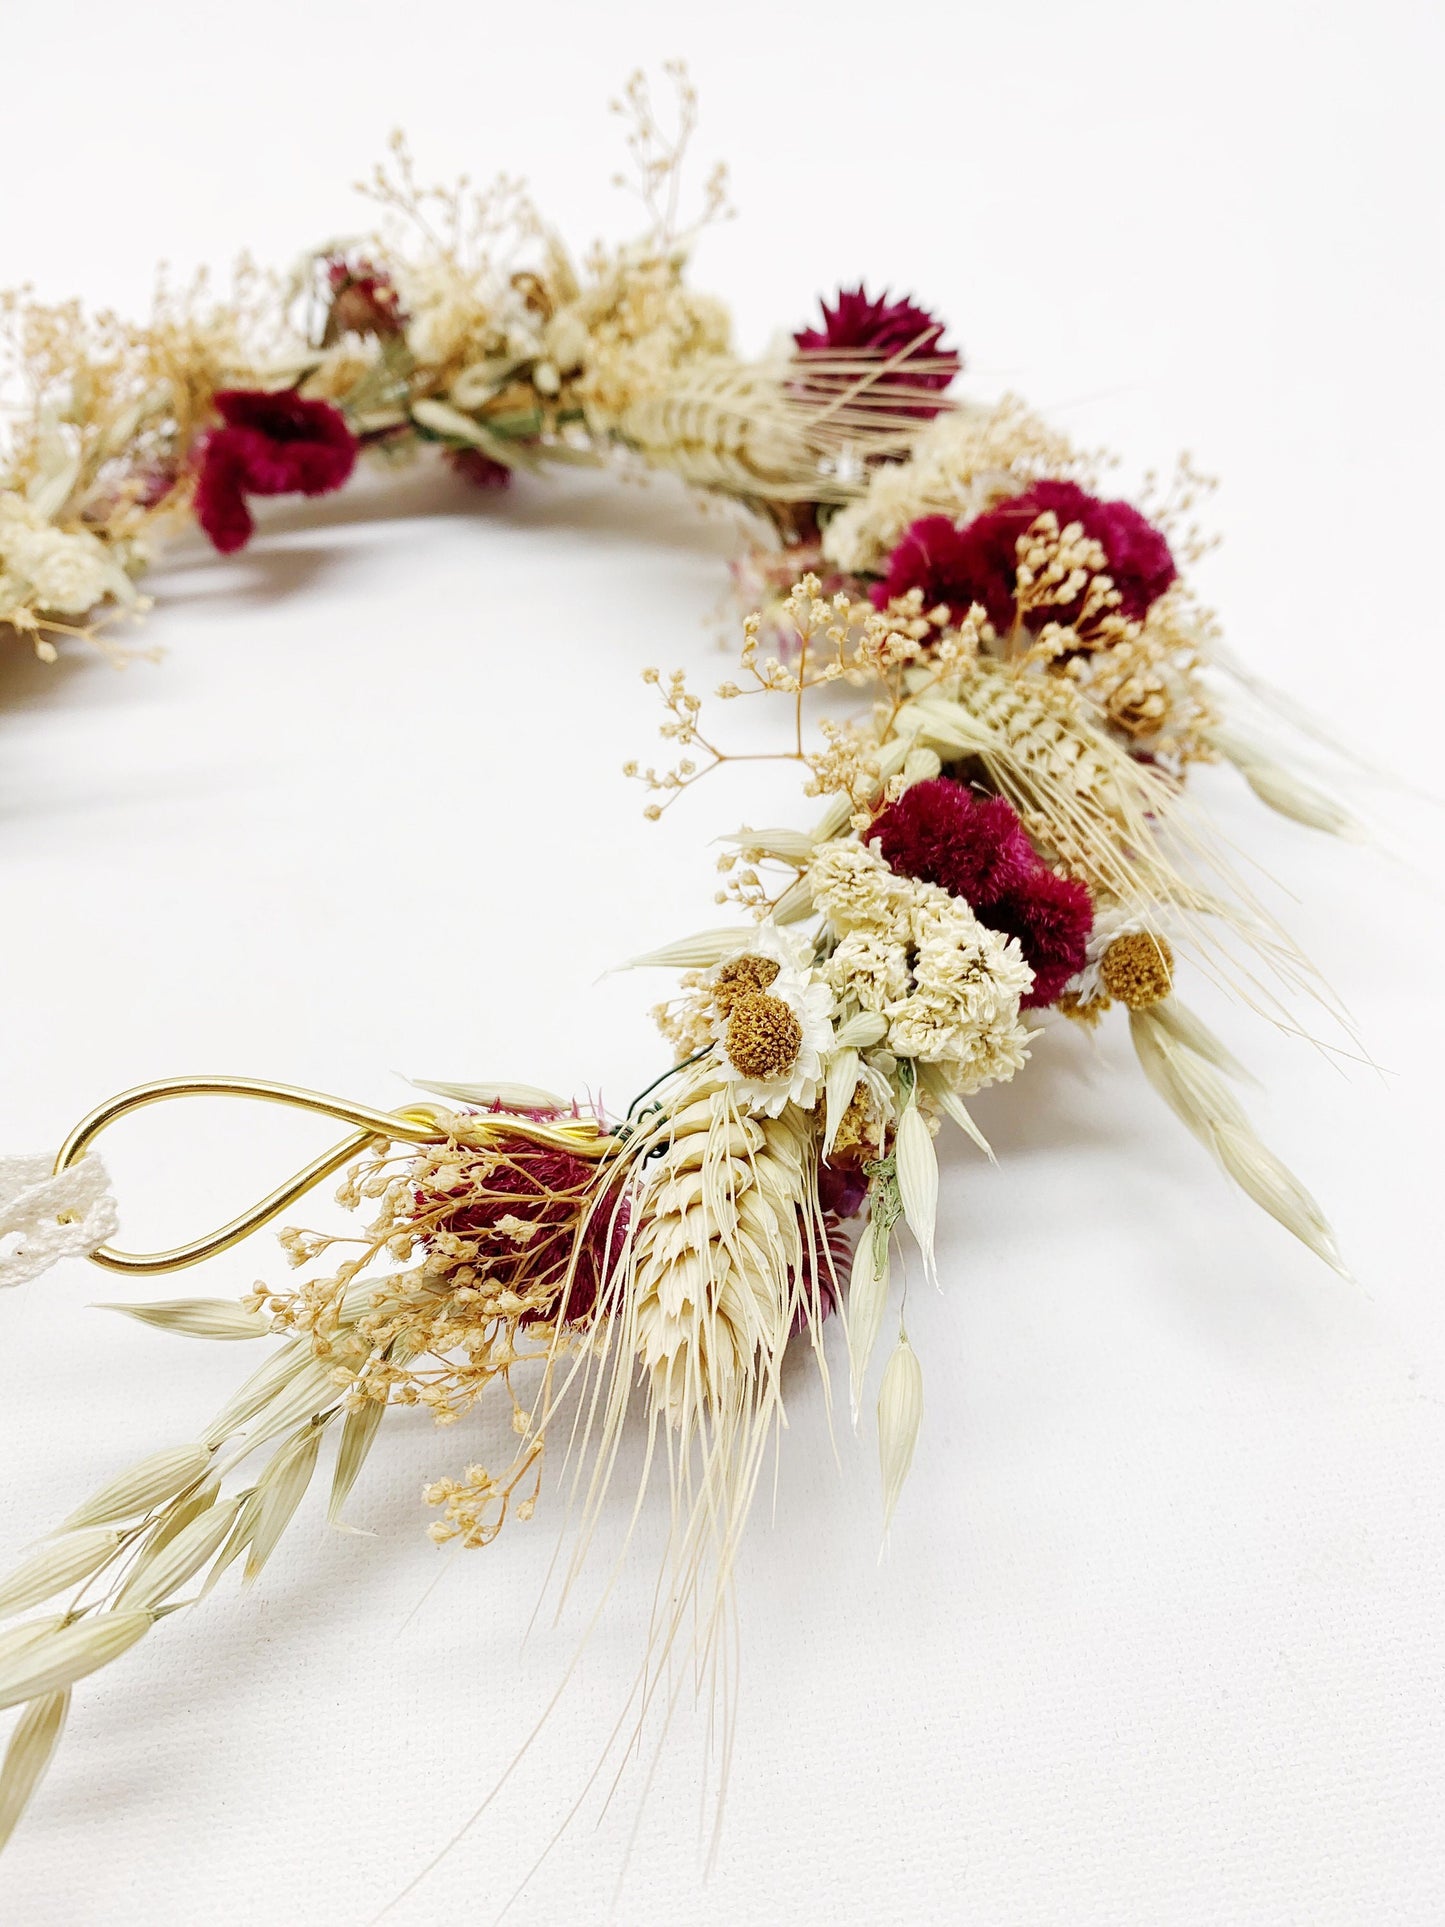 Head Wreath, natural flowers, dried flowers, head band, decoration, head crown, centerpiece, preserved flowers, wheat, photoshoot decor, wed